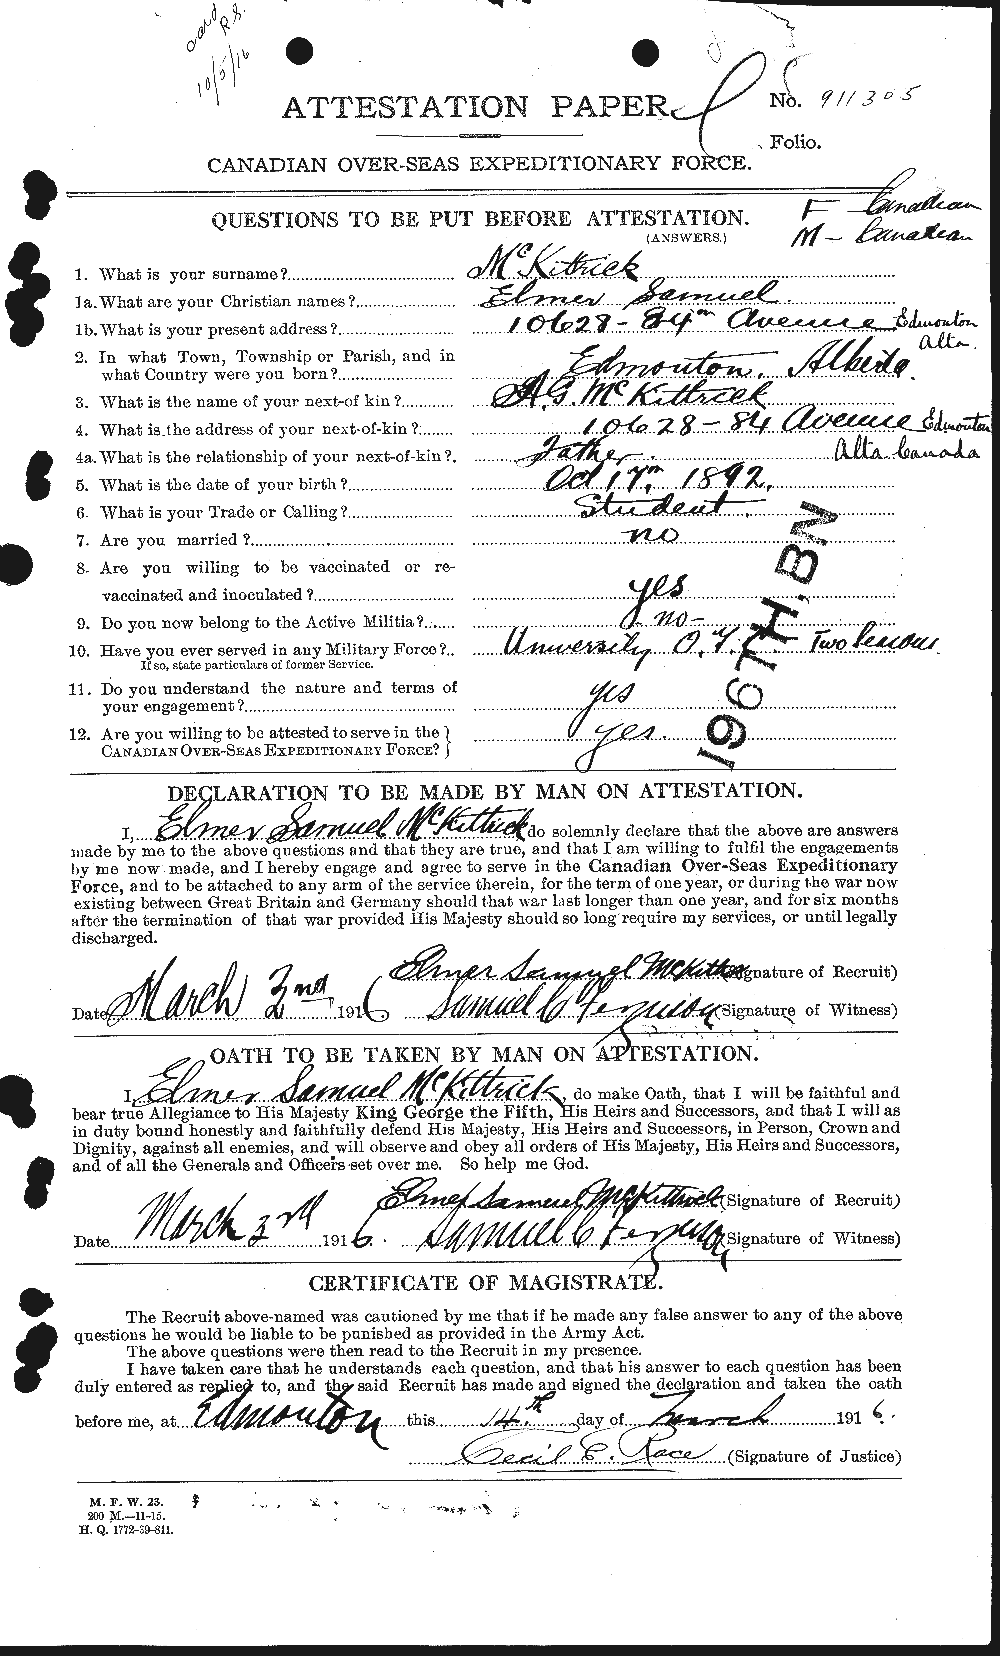 Personnel Records of the First World War - CEF 530669a